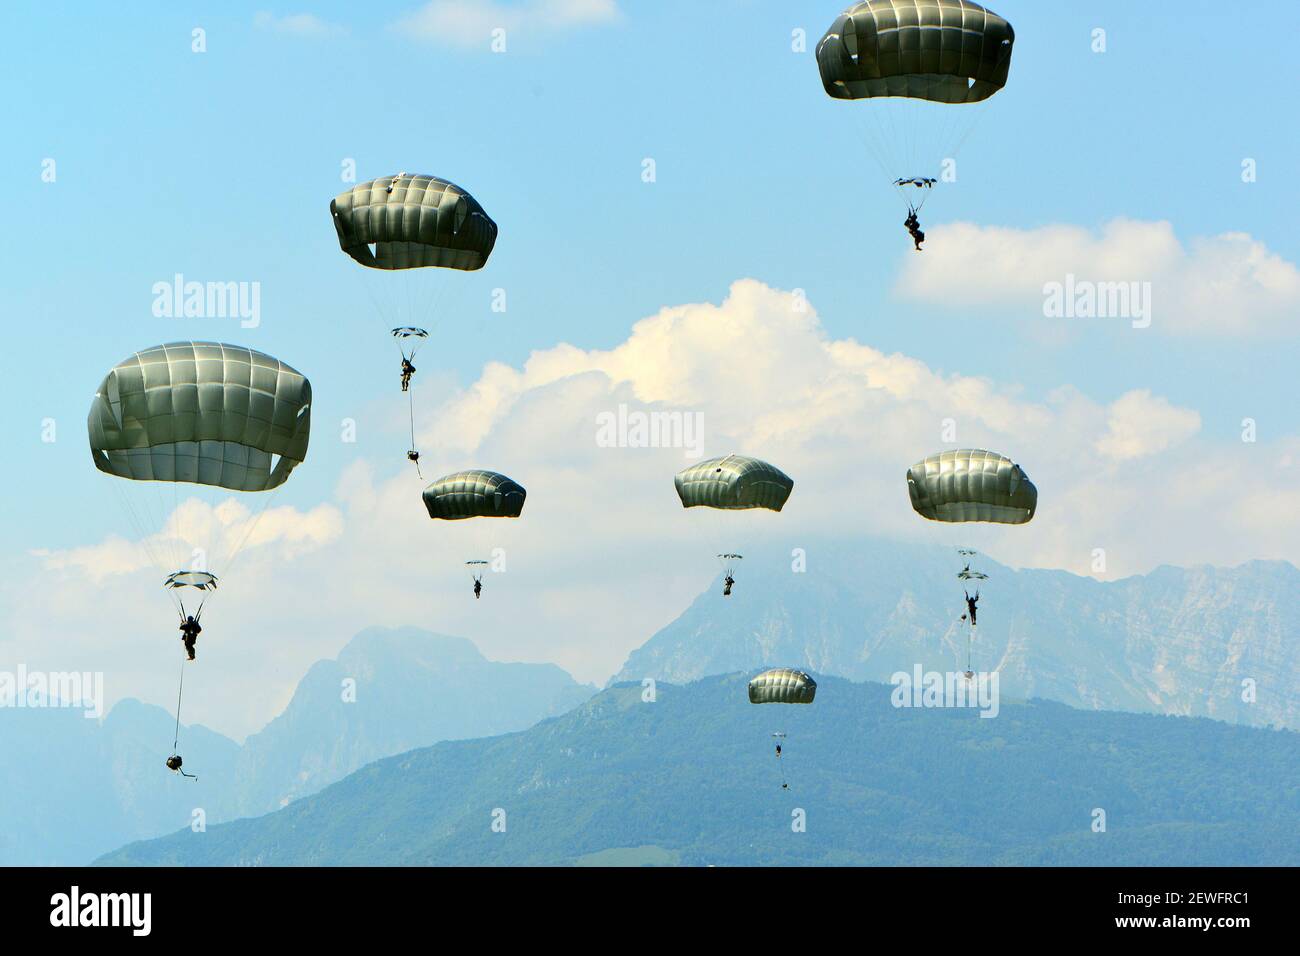 U.S. Army paratroopers assigned to the 54th Engineer Battalion, 173rd Airborne Brigade, conduct an airborne operation from a U.S. Air Force C-130 Hercules aircraft at Frida Drop Zone in Pordenone, Italy, June 29, 2016. The 173rd Airborne Brigade is the U.S. Army Contingency Response Force in Europe, capable of projecting forces anywhere in the U.S,. Europe, Africa or U.S. Central Command's areas of responsibility within 18 hours. (U.S. Army photo by Visual Information Specialist Paolo Bovo)  Please note: Fees charged by the agency are for the agency’s services only, and do not, nor are they in Stock Photo